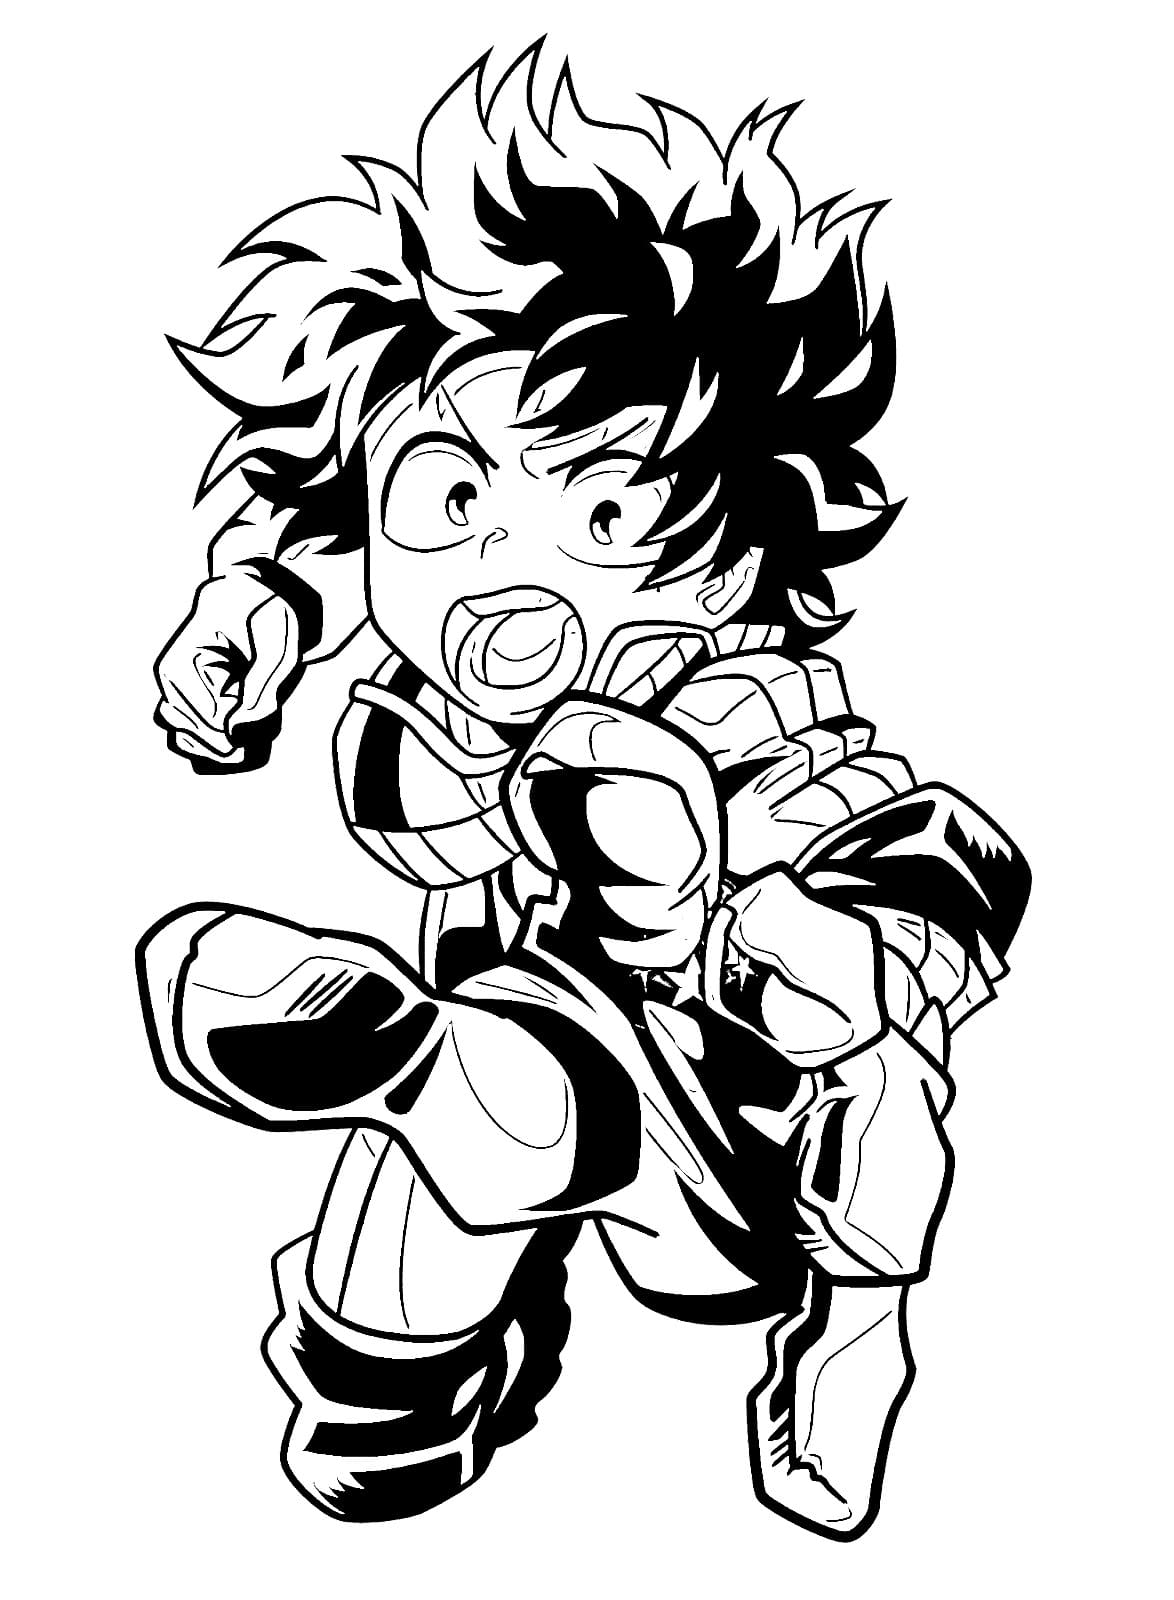 Mha Coloring Pages Deku Coloring Pages